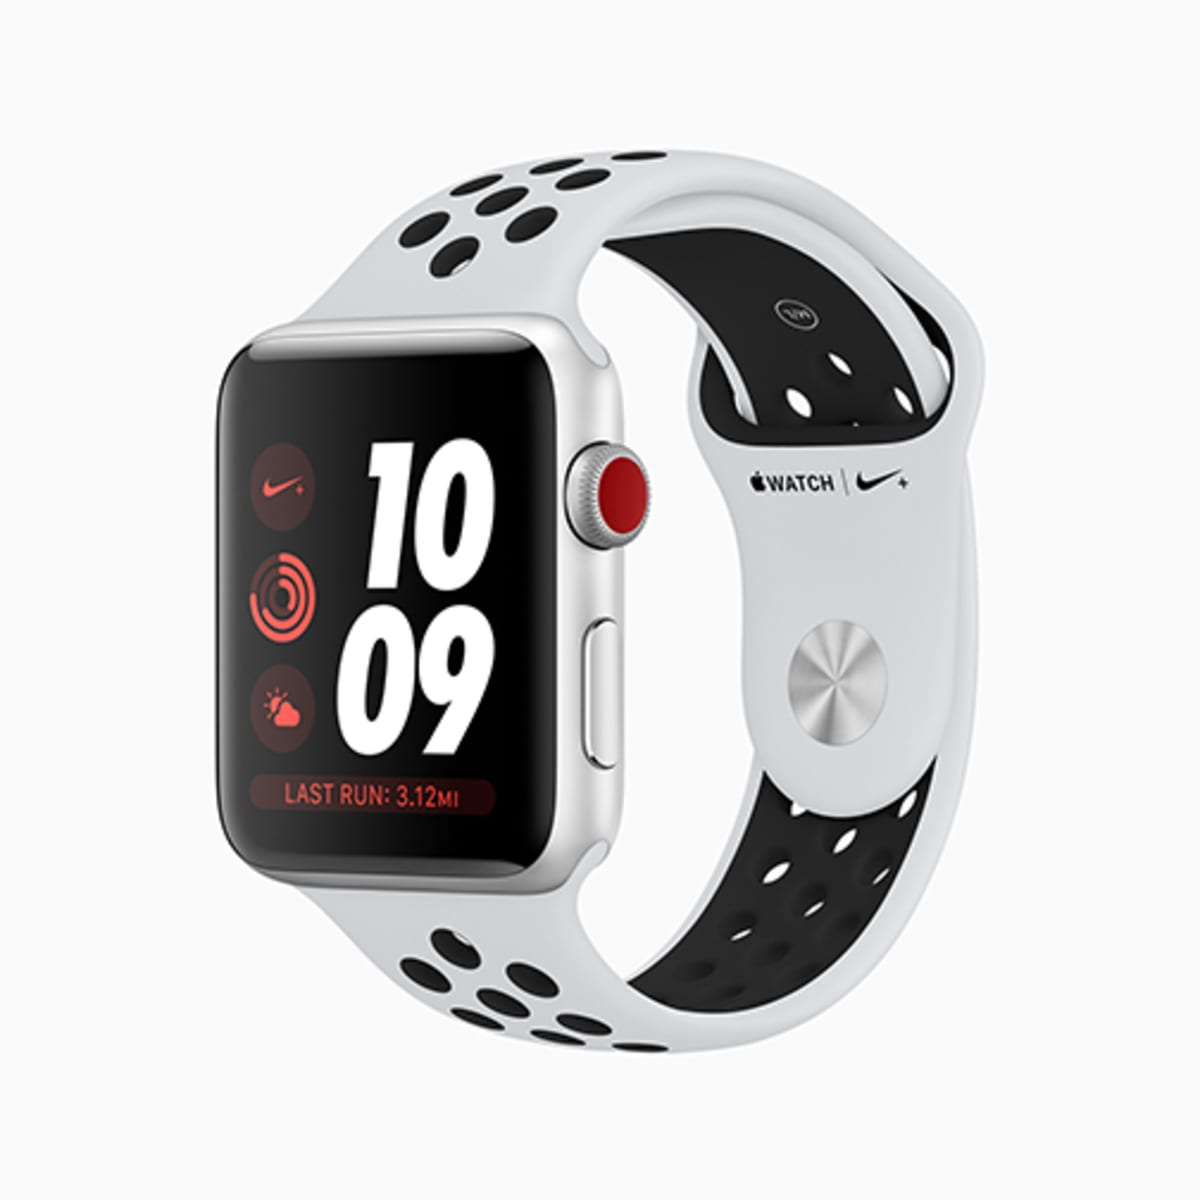 Under Review: The Apple Watch Series 3's Fitness Functions - Men's